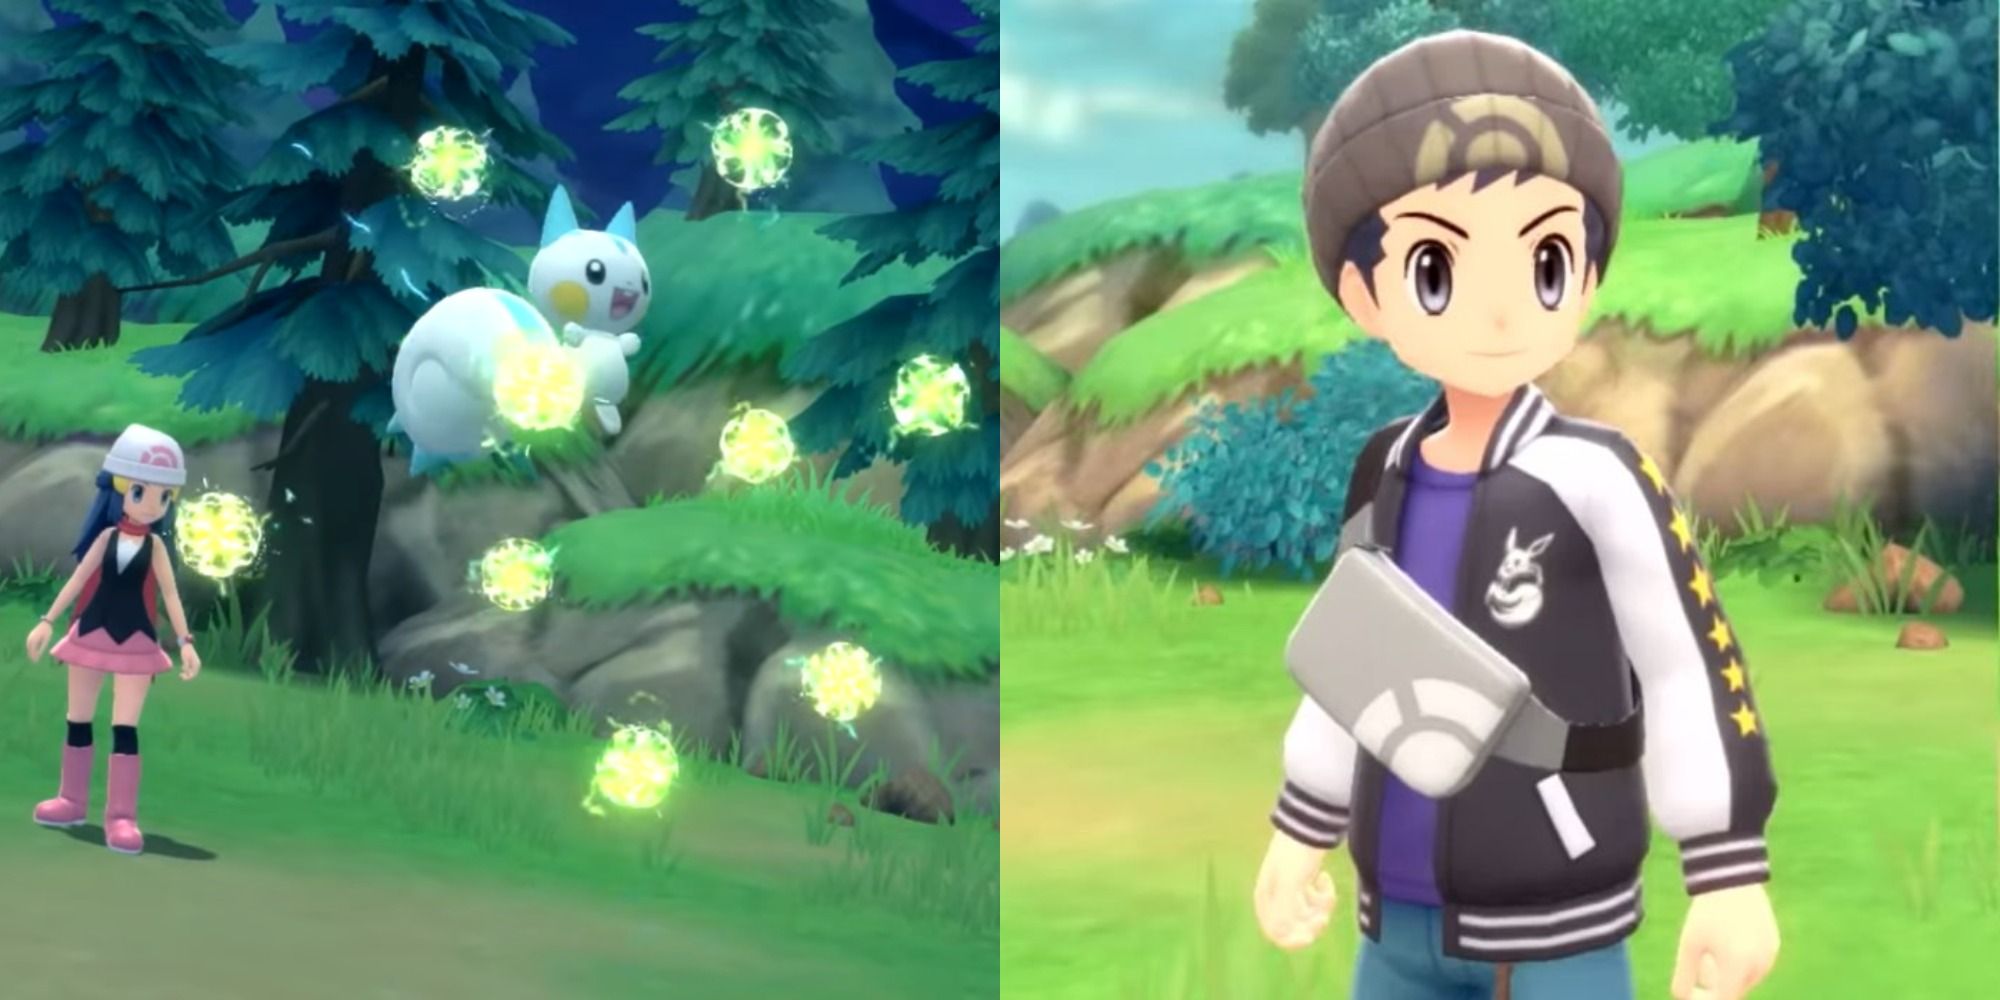 10 Things We Learned From The New Pokémon Brilliant Diamond & Shining Pearl Trailer